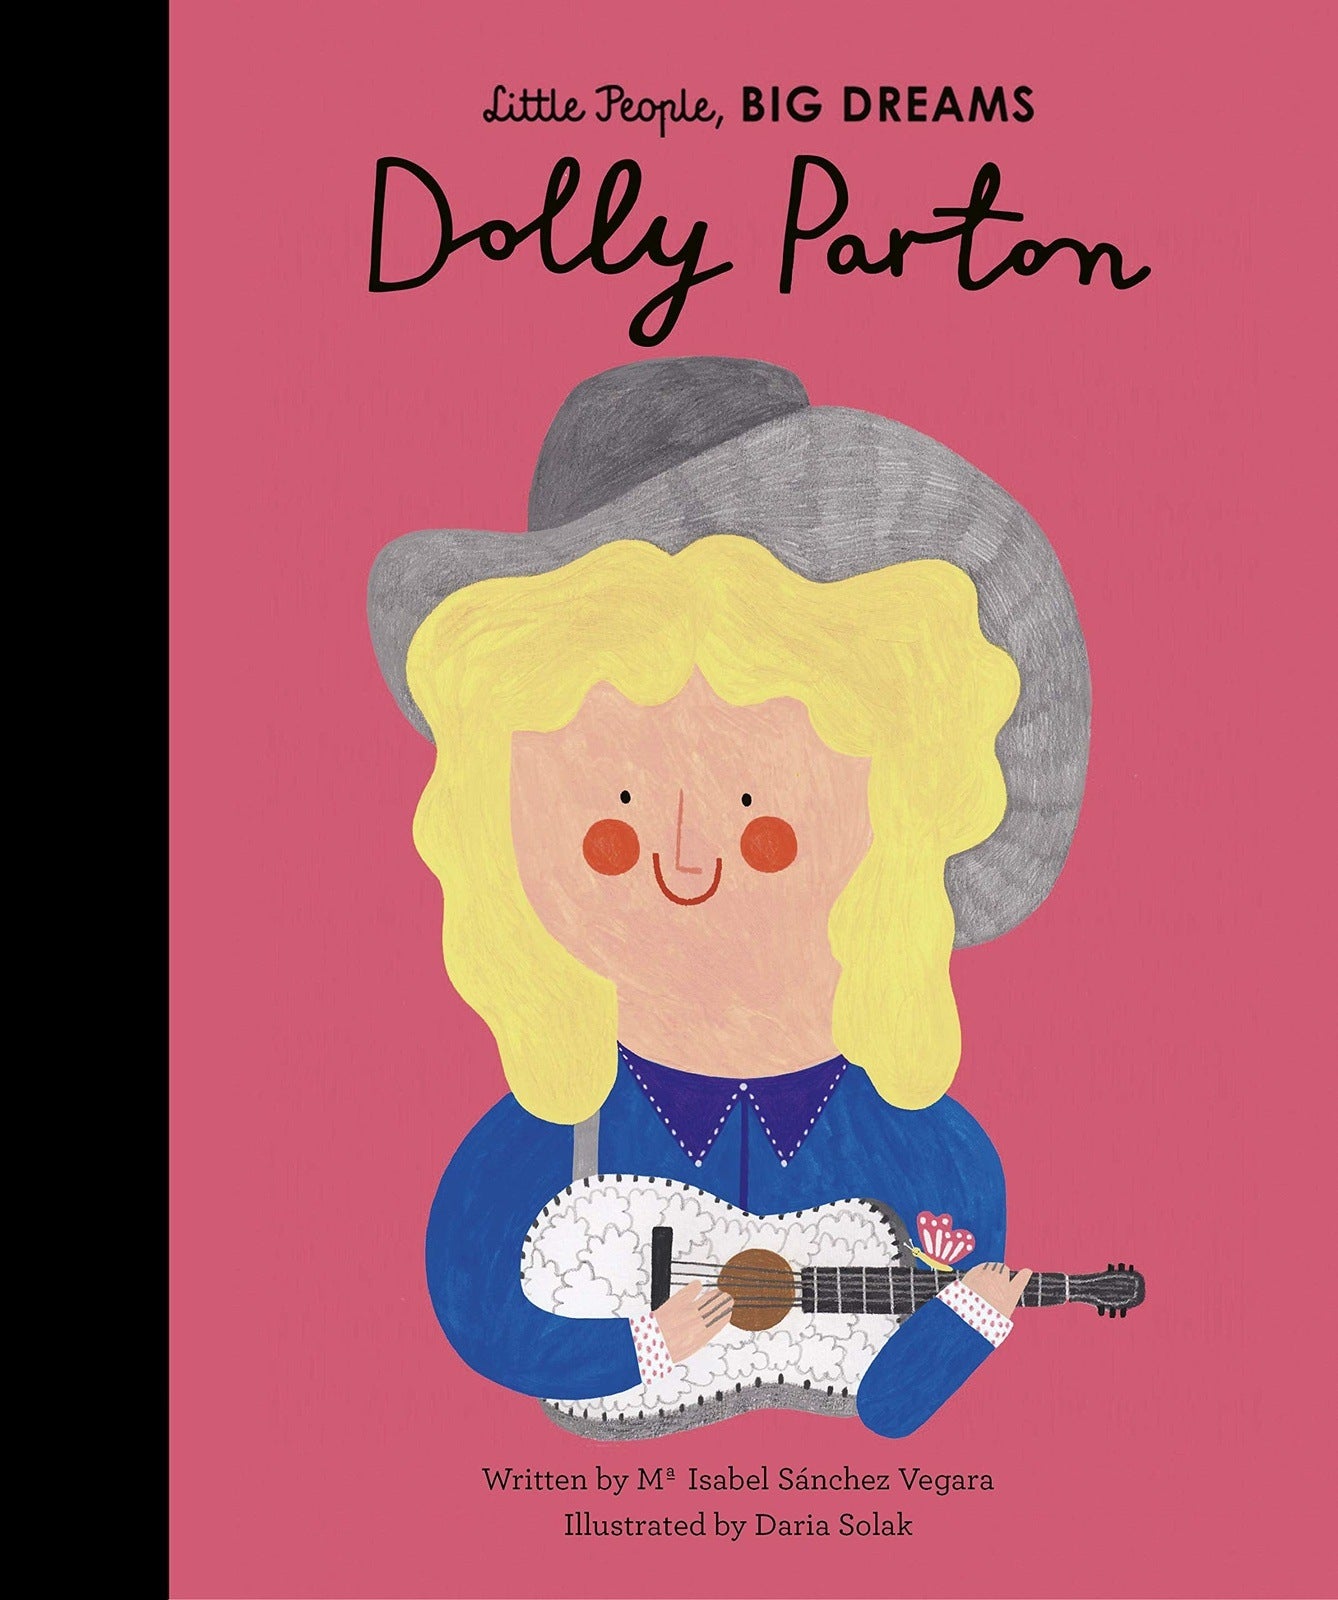 Load image into Gallery viewer, Little People Big Dreams, Dolly Parton, Books about inspirational people, Children’s books, Hardback children’s books, Nottinghamshire Stockist, midlands kids store, independent kids brand
